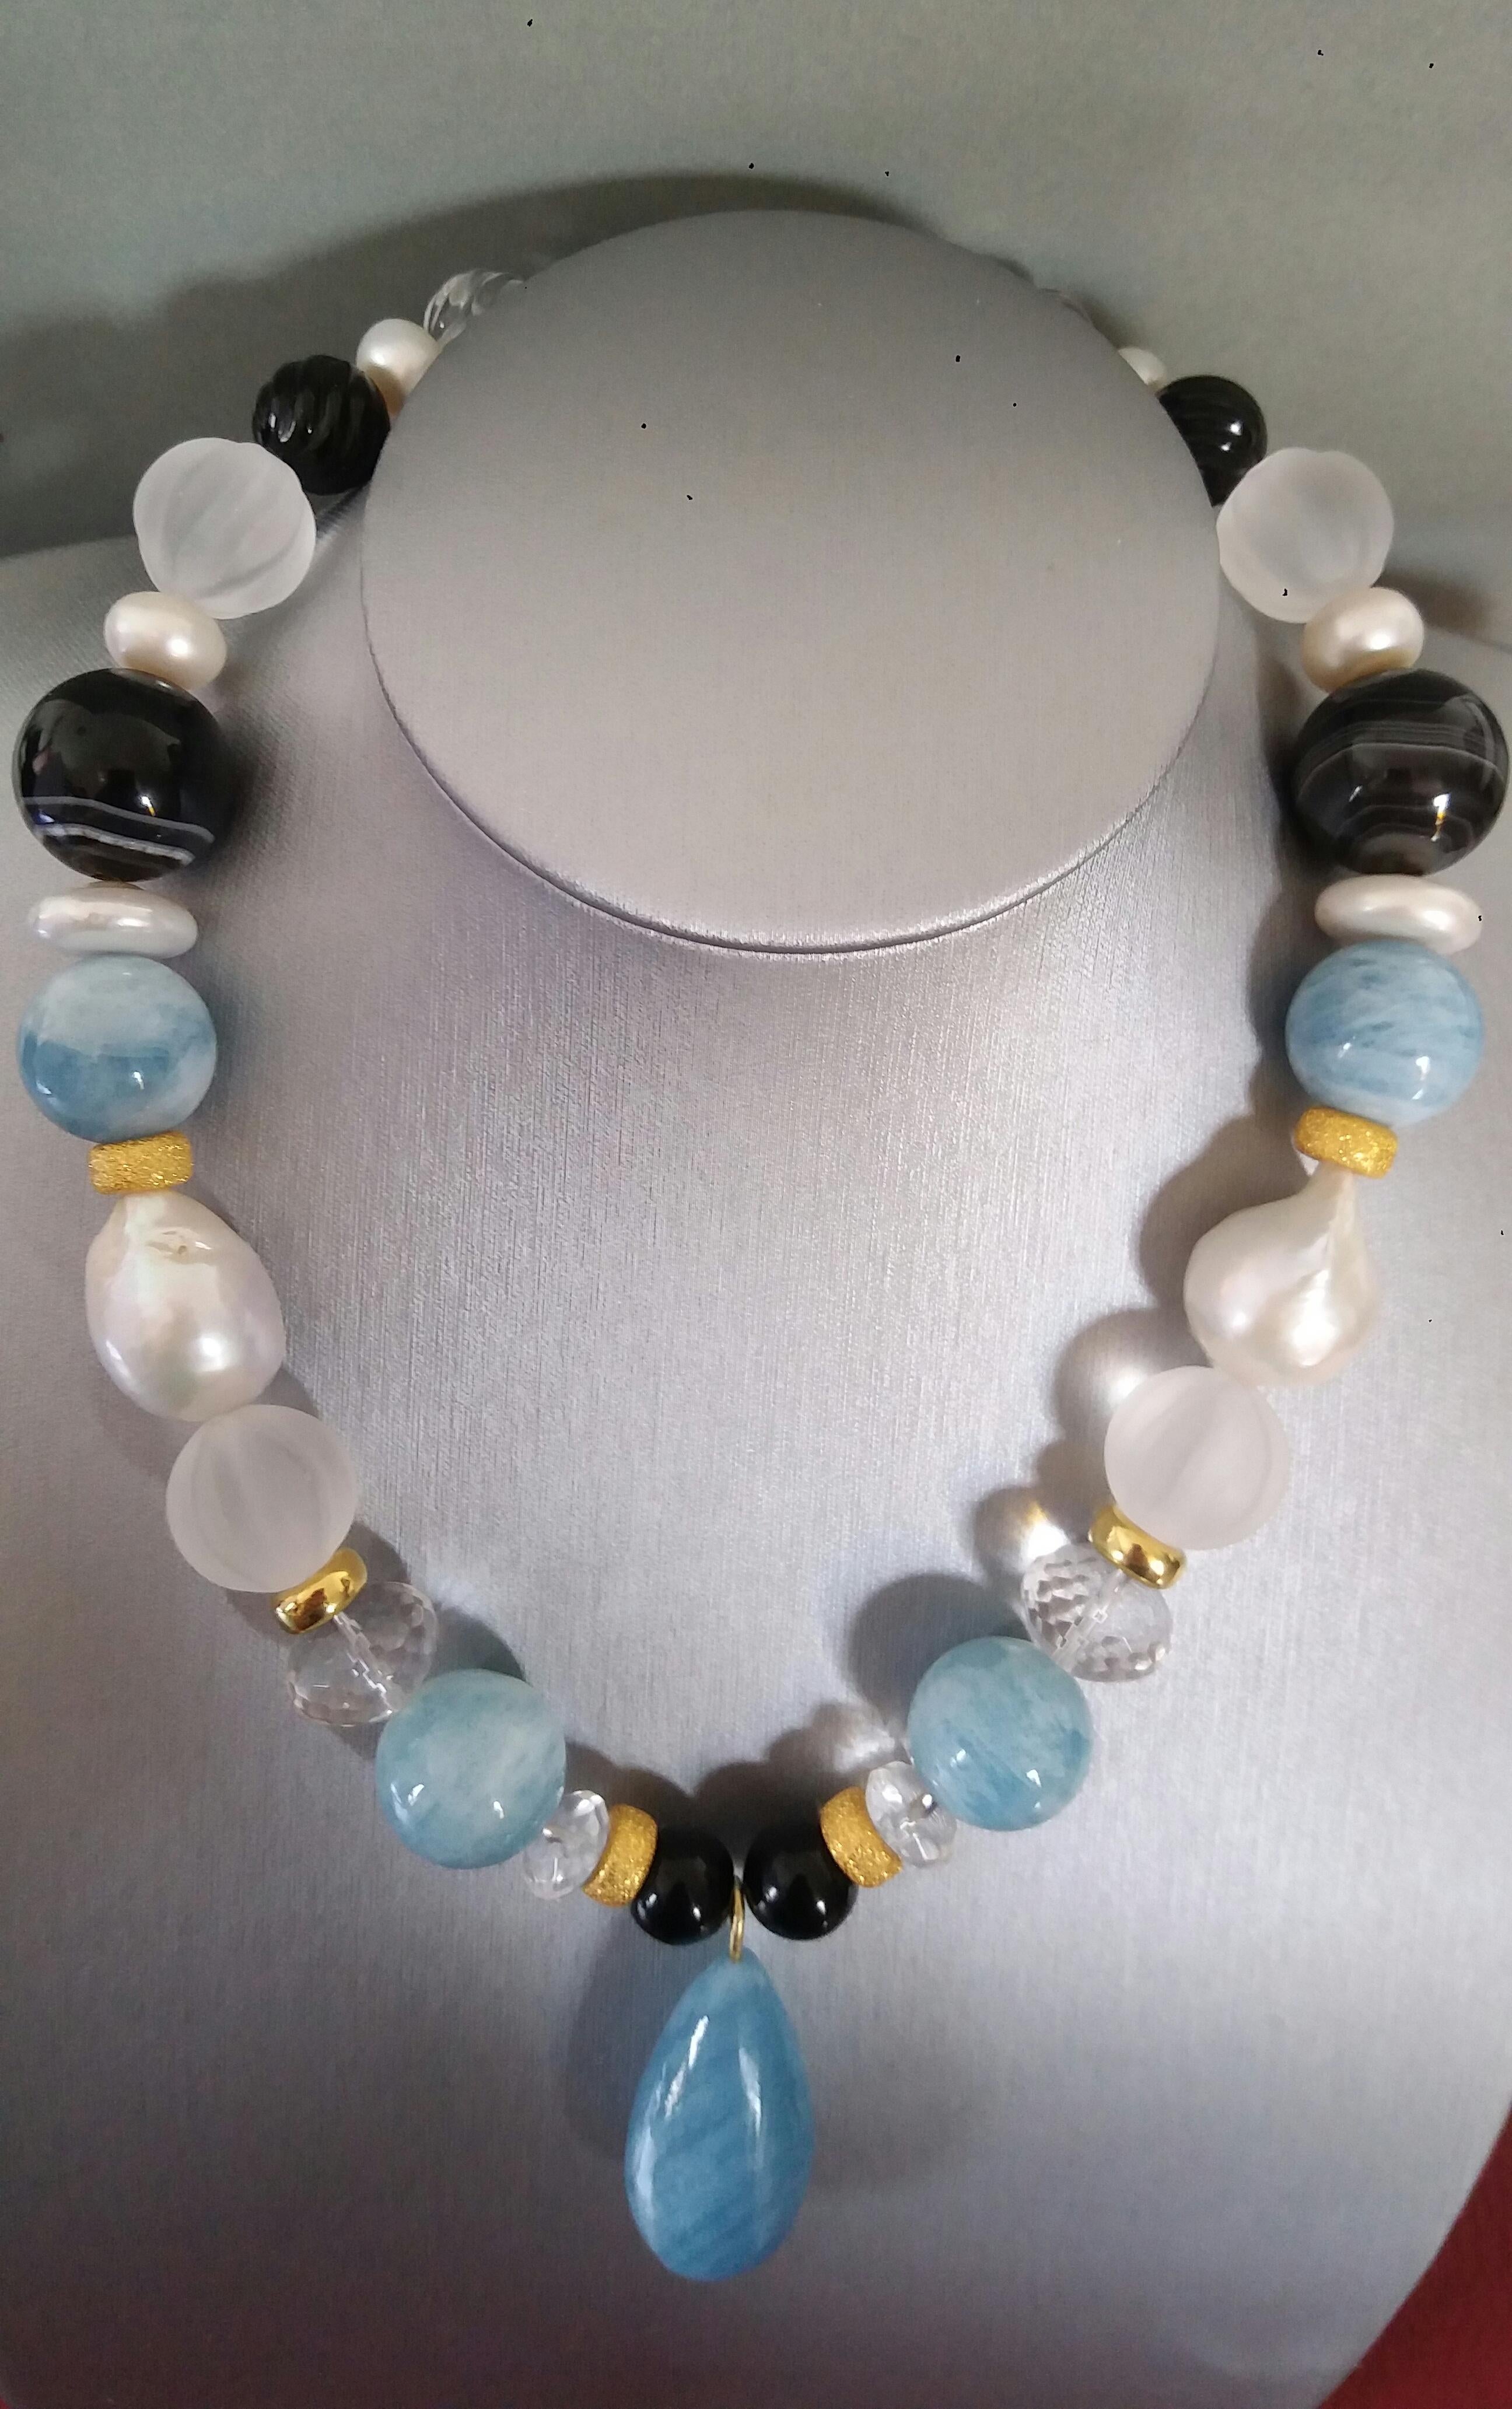 Aquamarine Beads And Pendant Baroque Pearls Quartz Onyx Yellow Gold Necklace For Sale 1